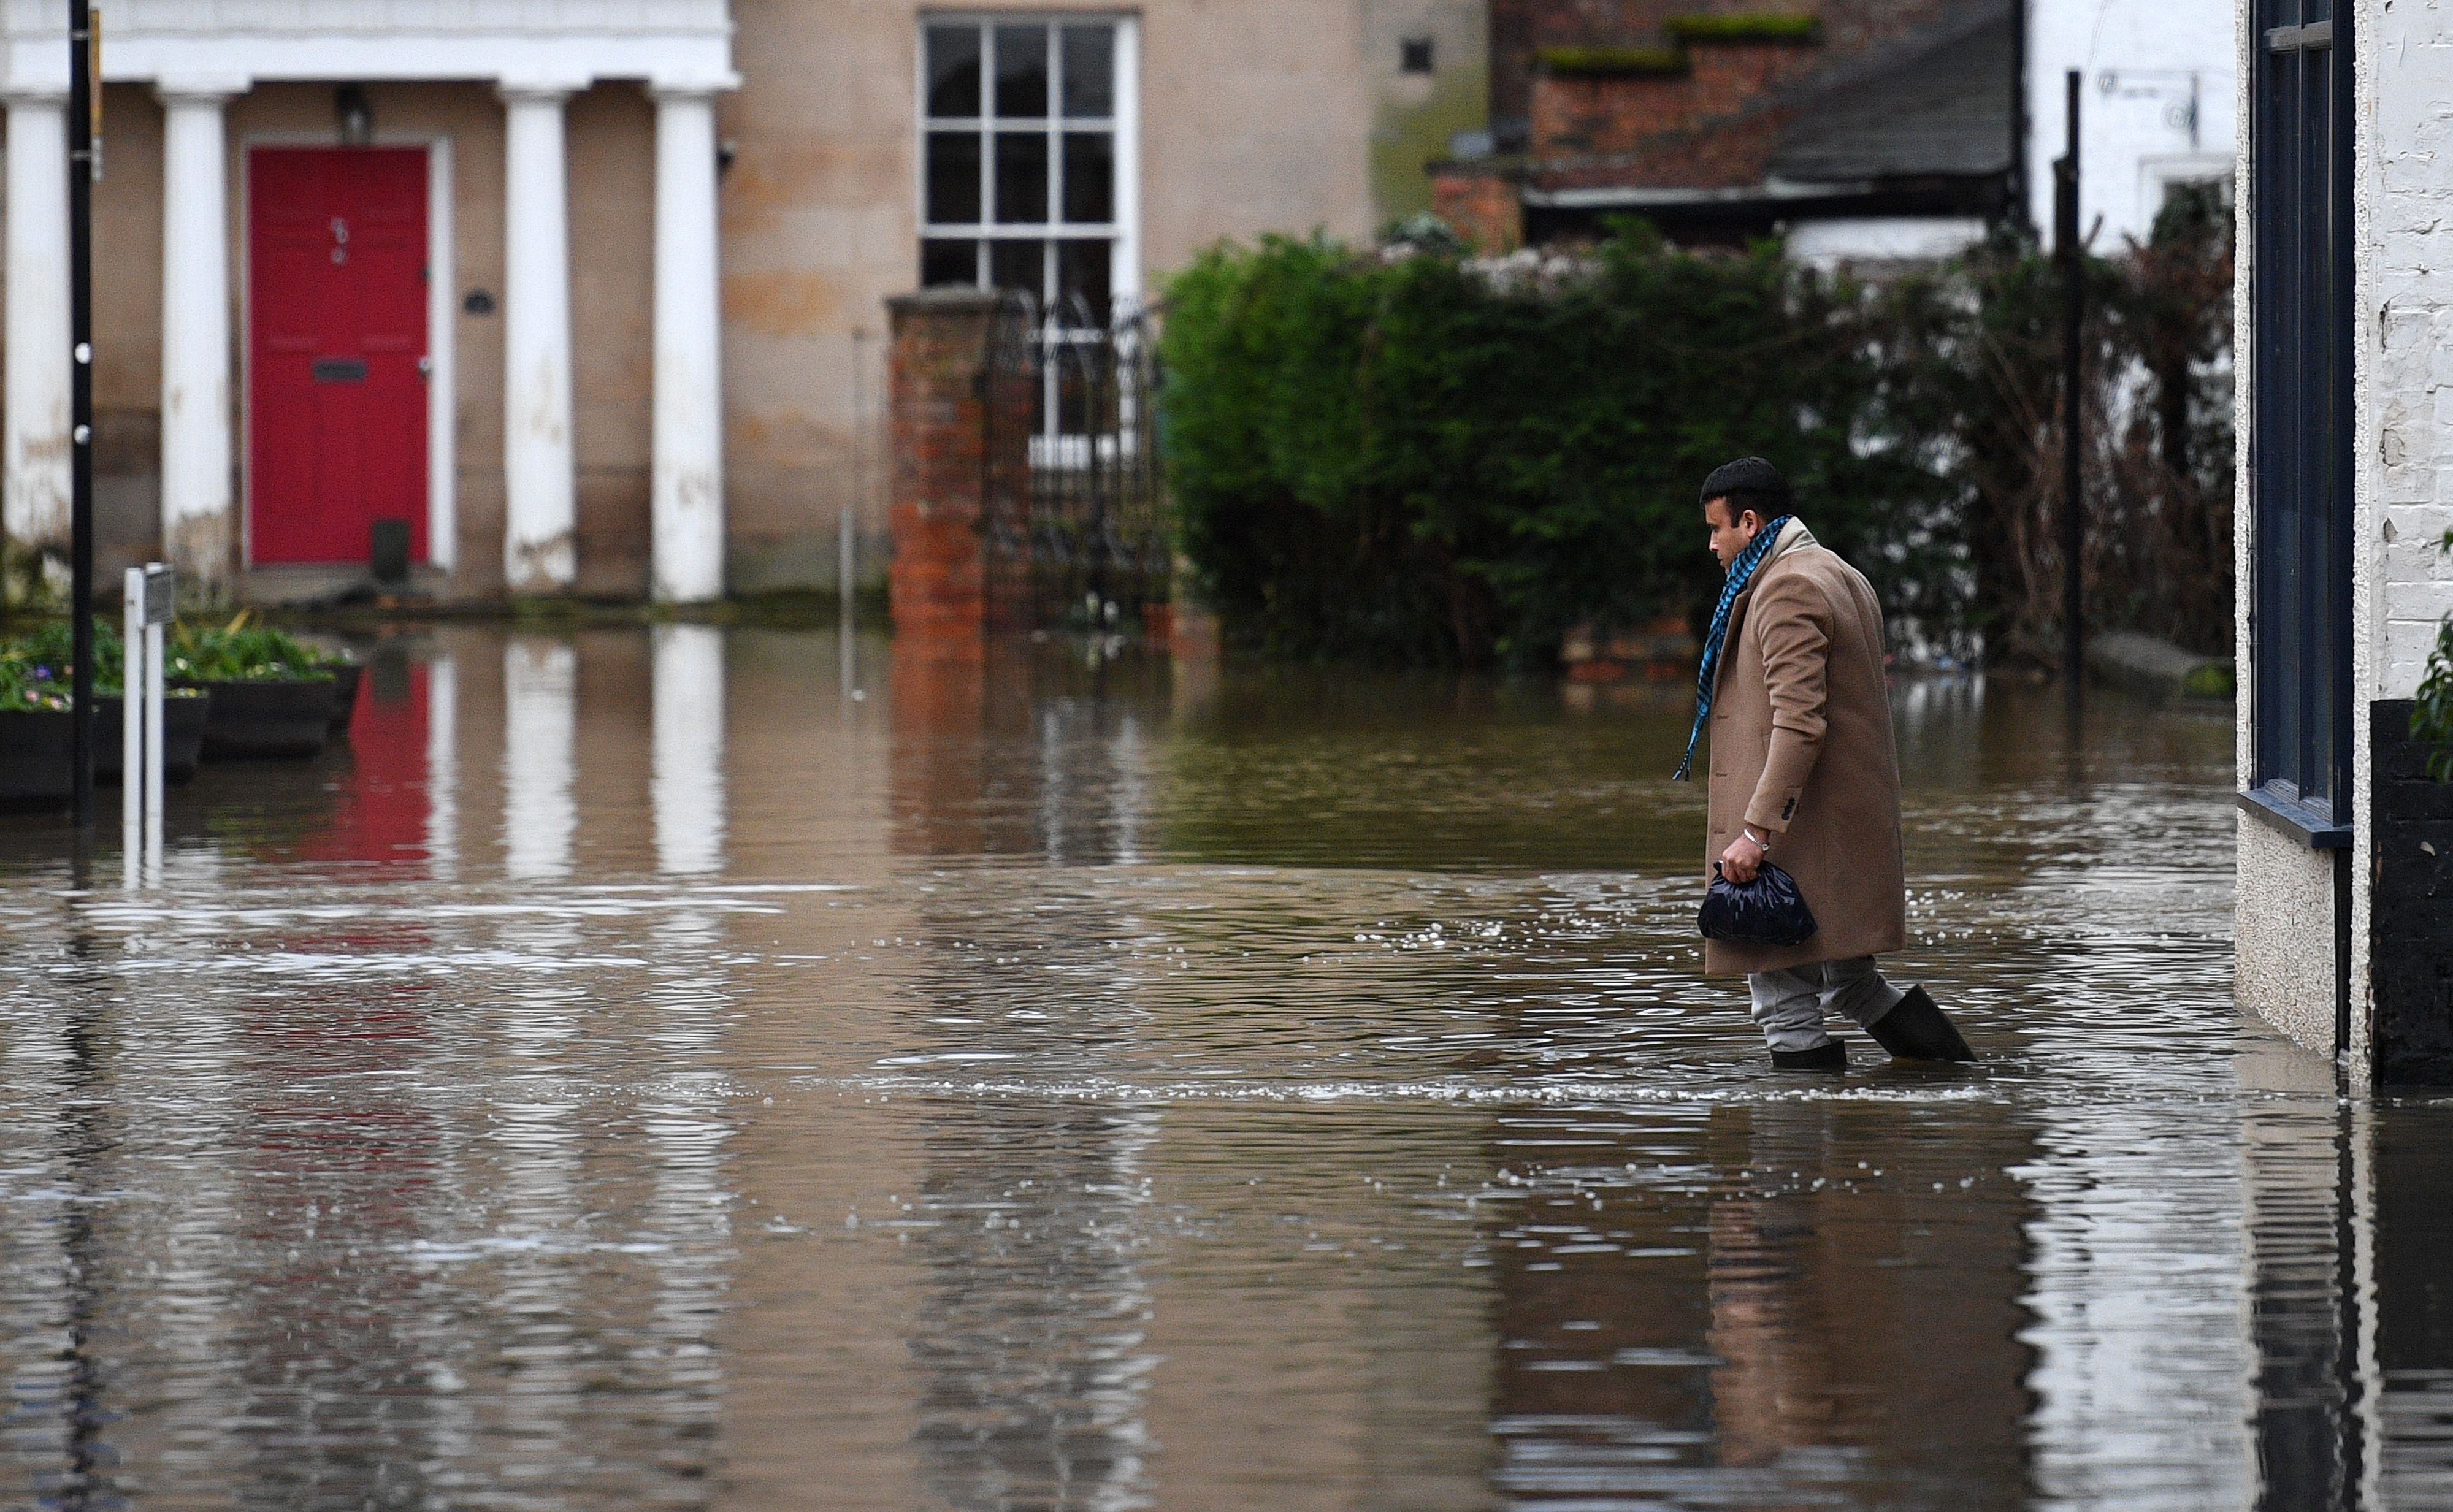 As climate change worsens in the UK, we will continue to see increased flooding